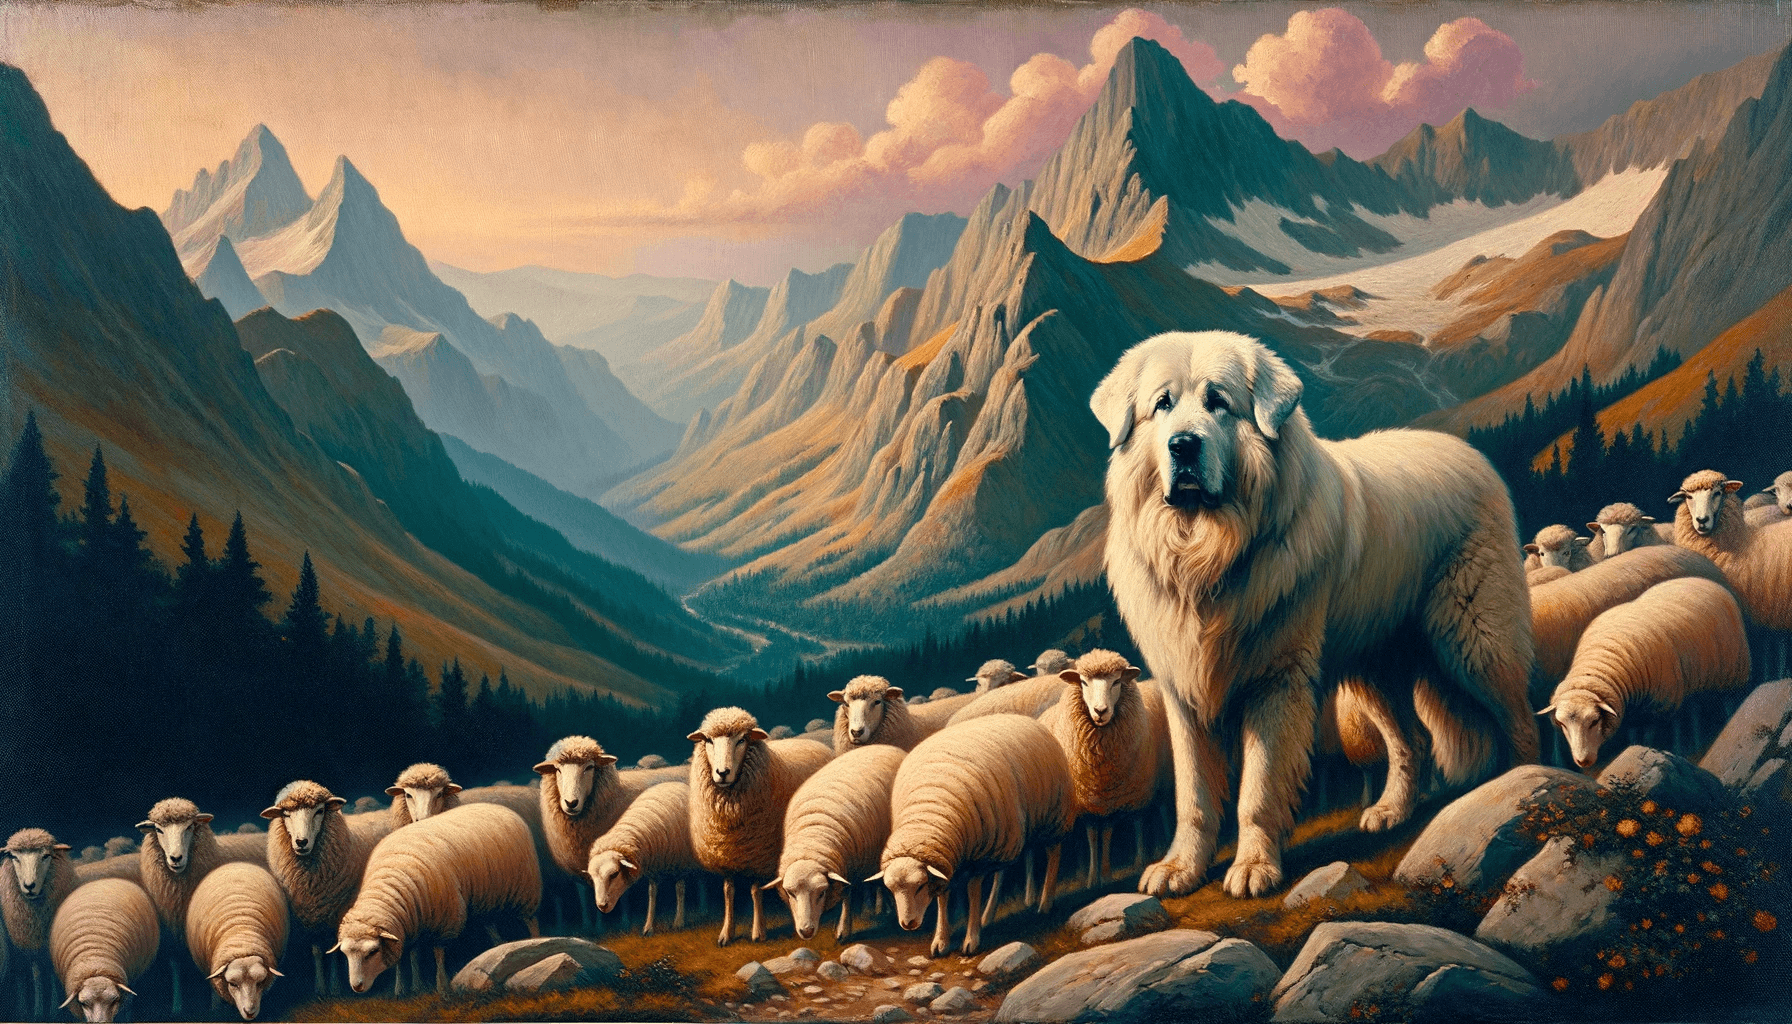 A vintage painting of a Great Pyrenees guarding sheep in the Pyrenees Mountains.